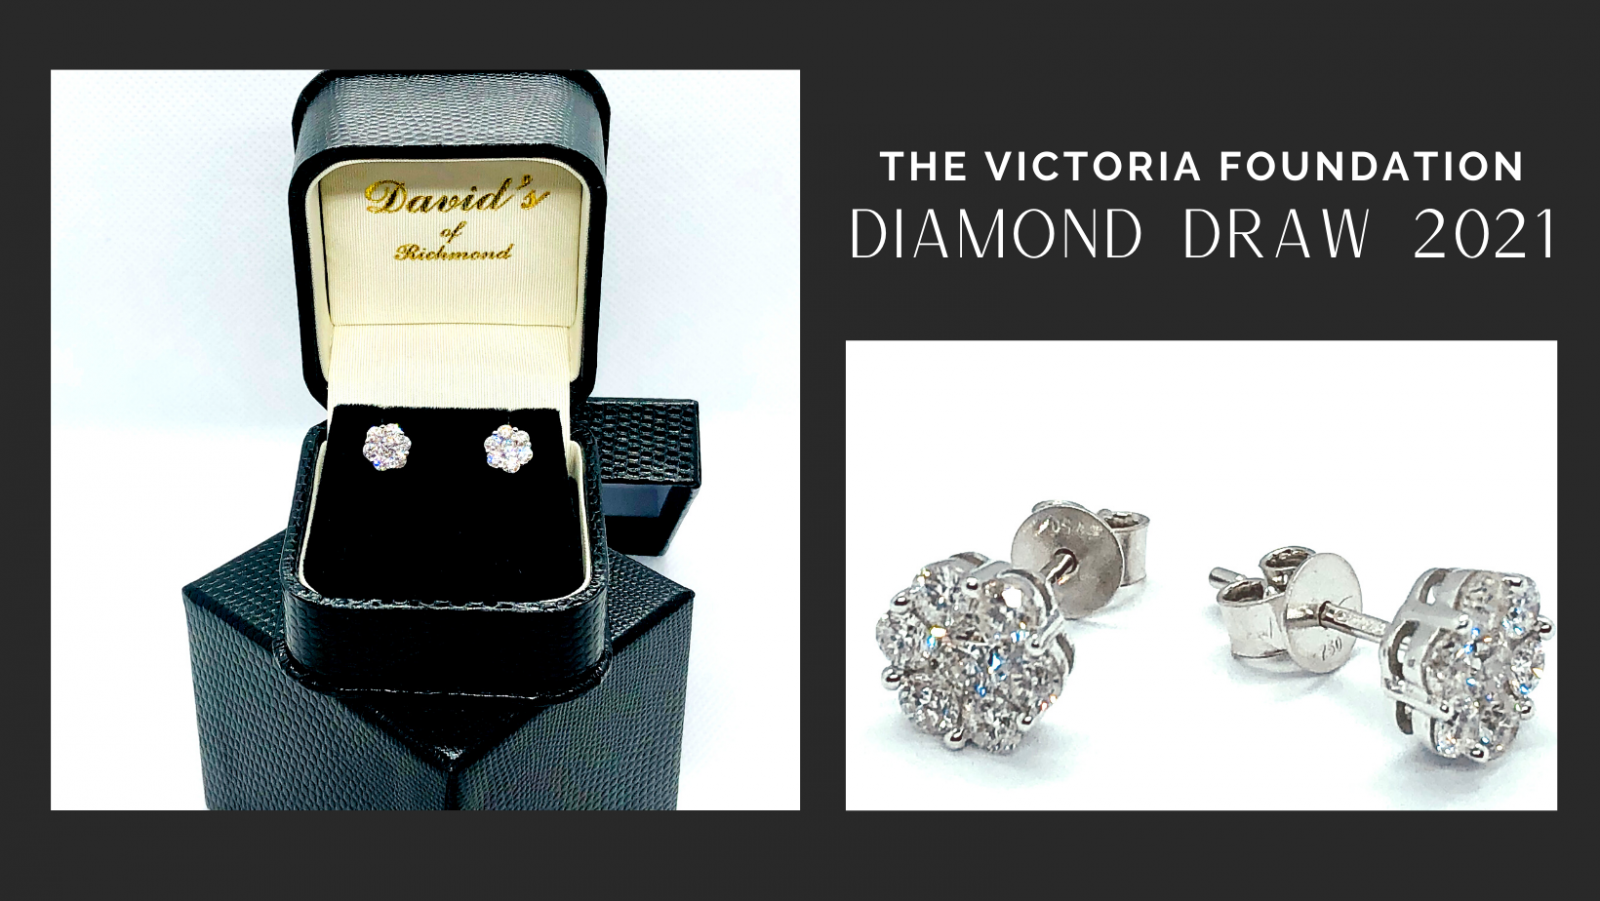 TVF's Diamond Draw is CLOSED - please find details of who won the Diamond Earrings and other prizes